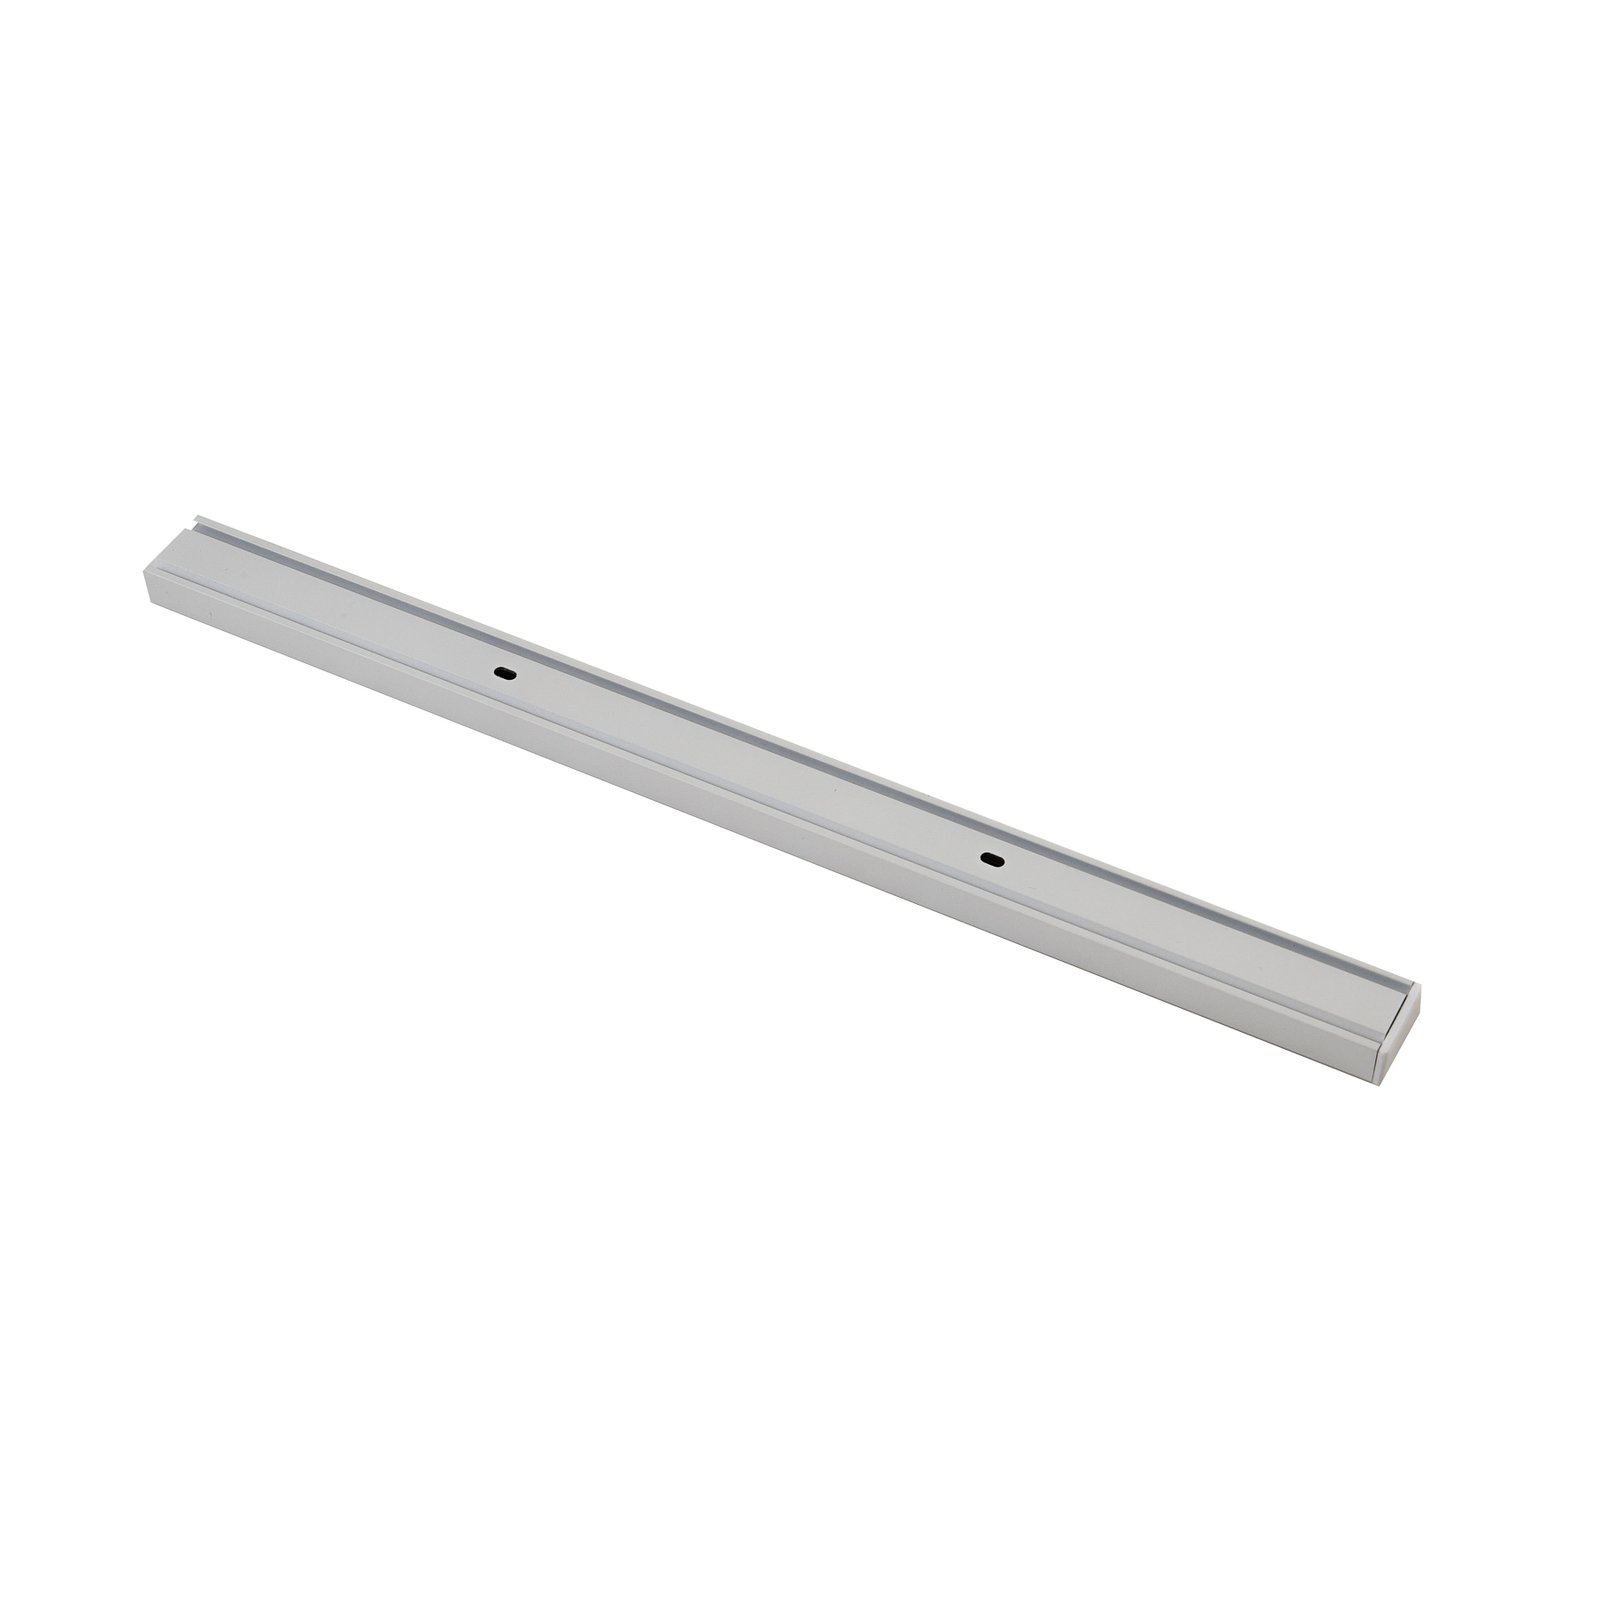 Lindby cover Linaro, white, single-circuit track lighting system, 50 cm